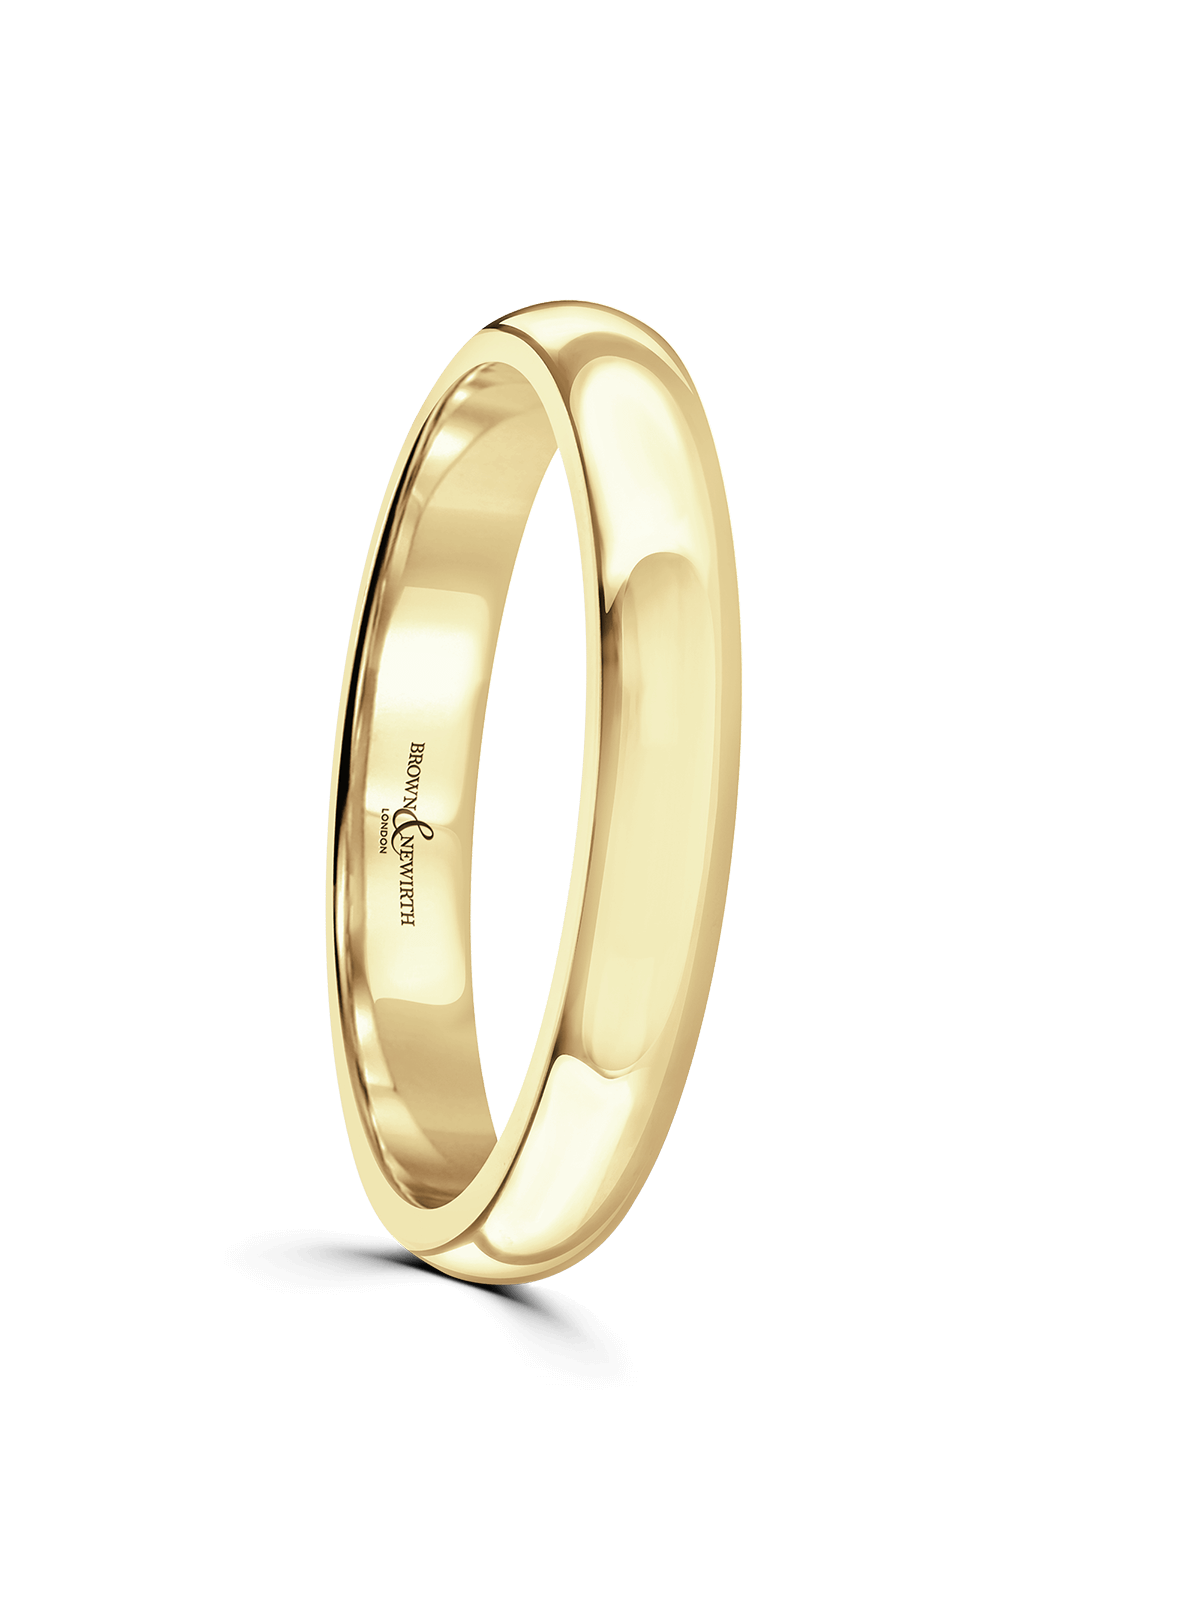 Brown & Newirth Always 3.5mm Wedding Ring in 18ct Yellow Gold